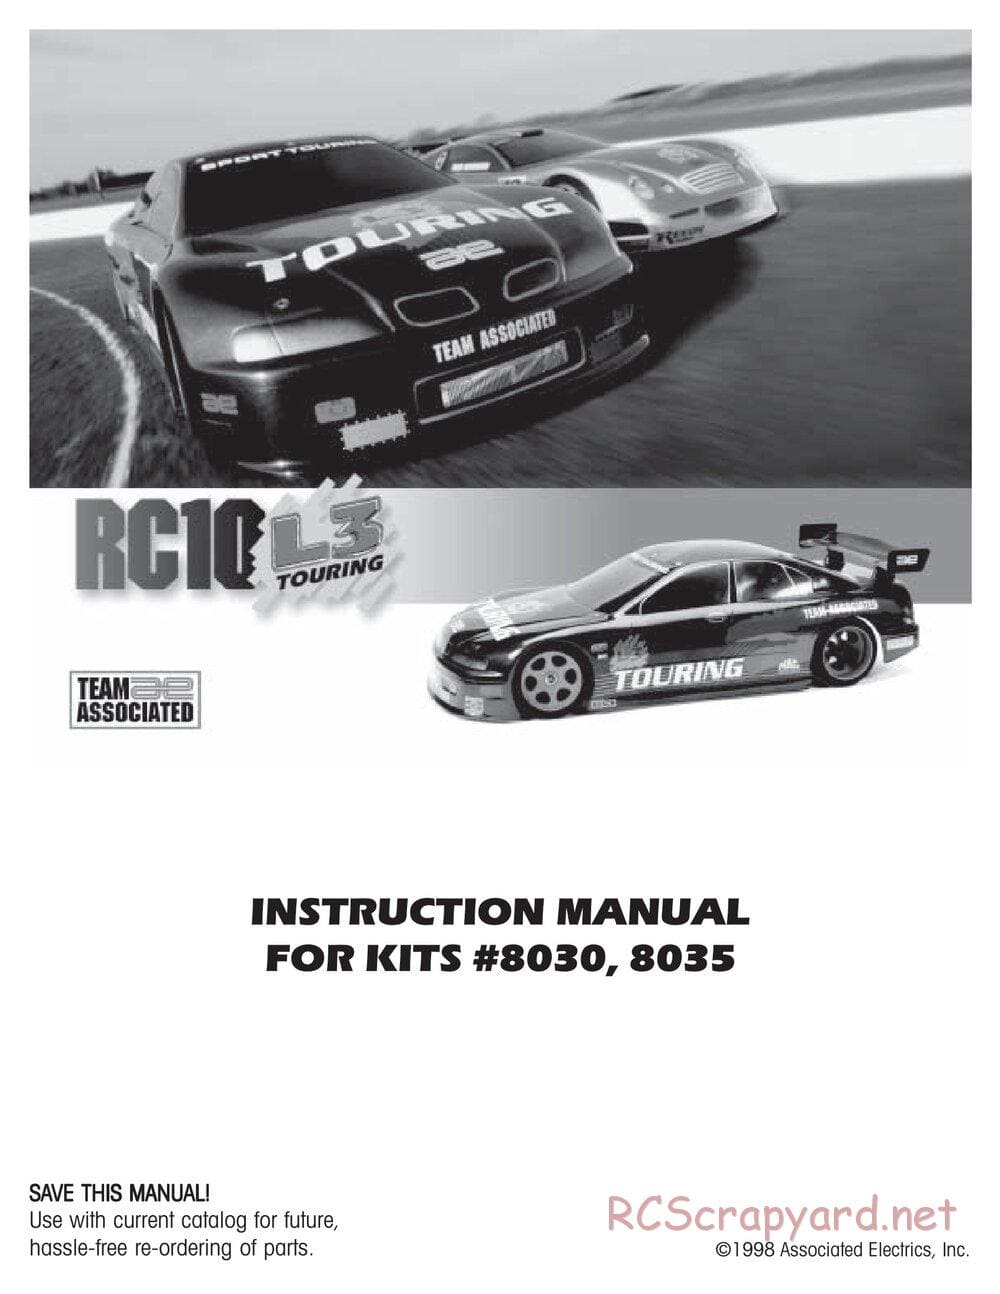 Team Associated - RC10L3 Touring - Manual - Page 1